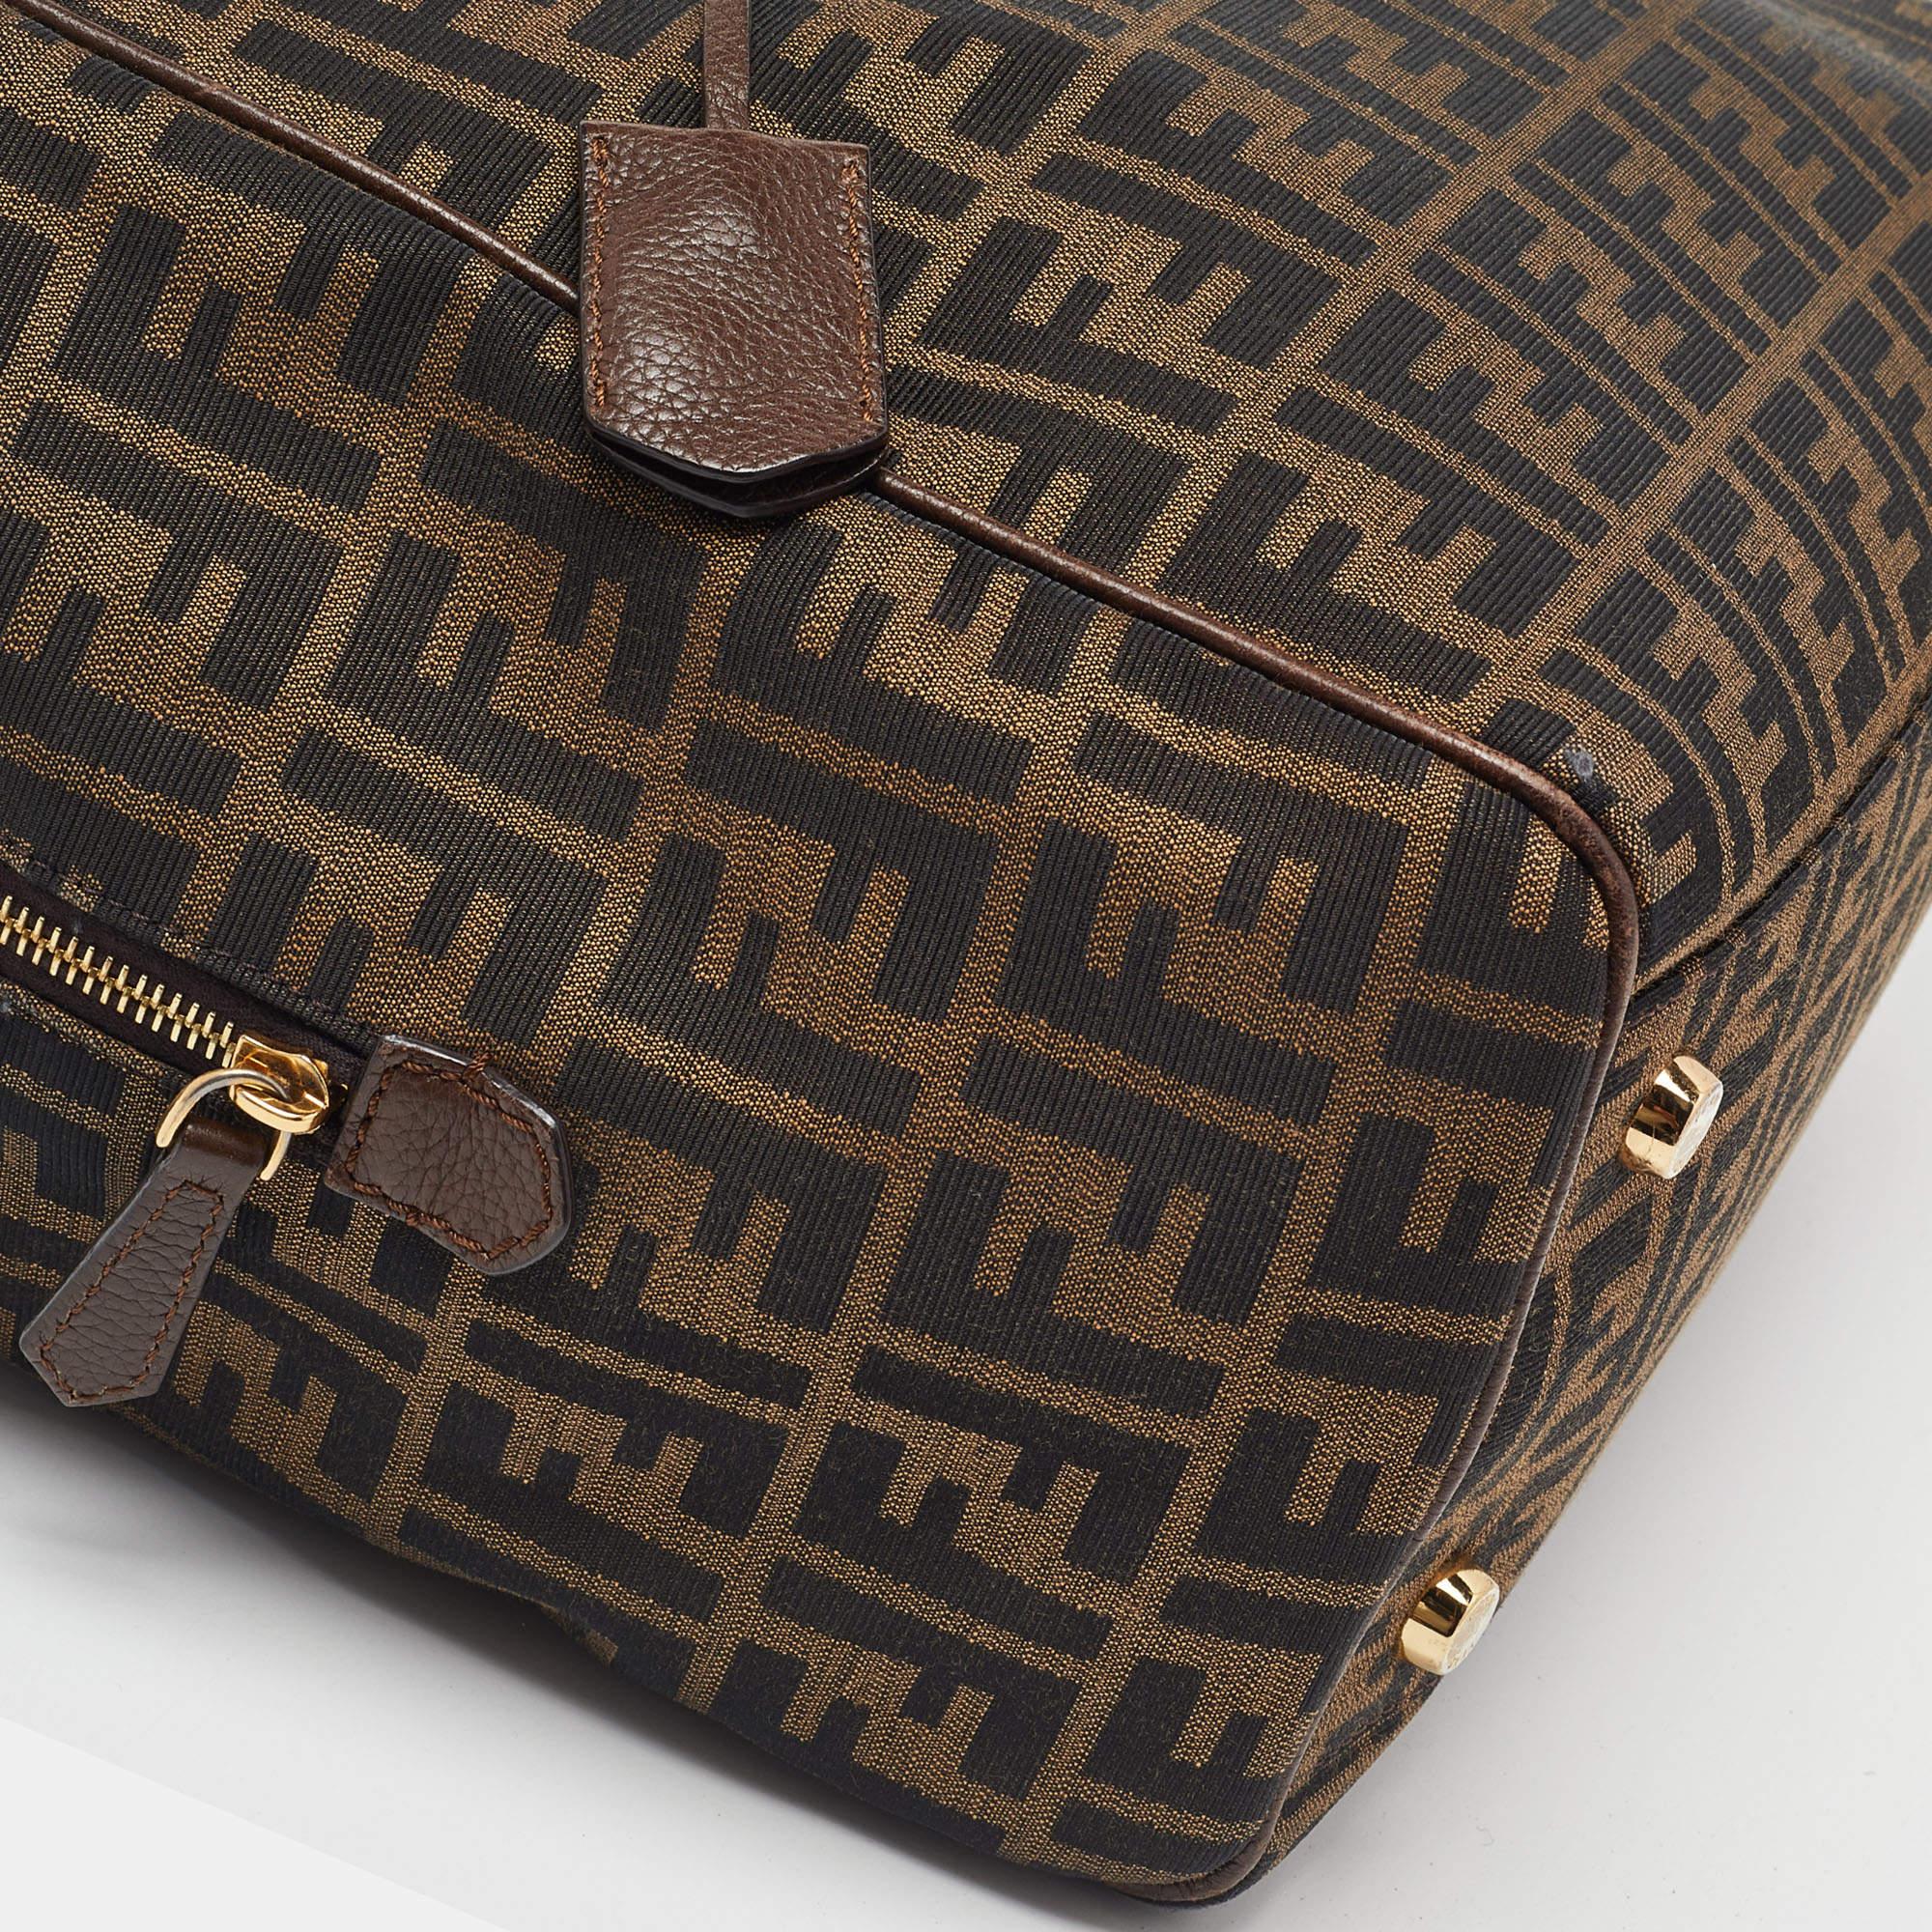 East Meets West: The LV² Collection Has It All - LUXUO